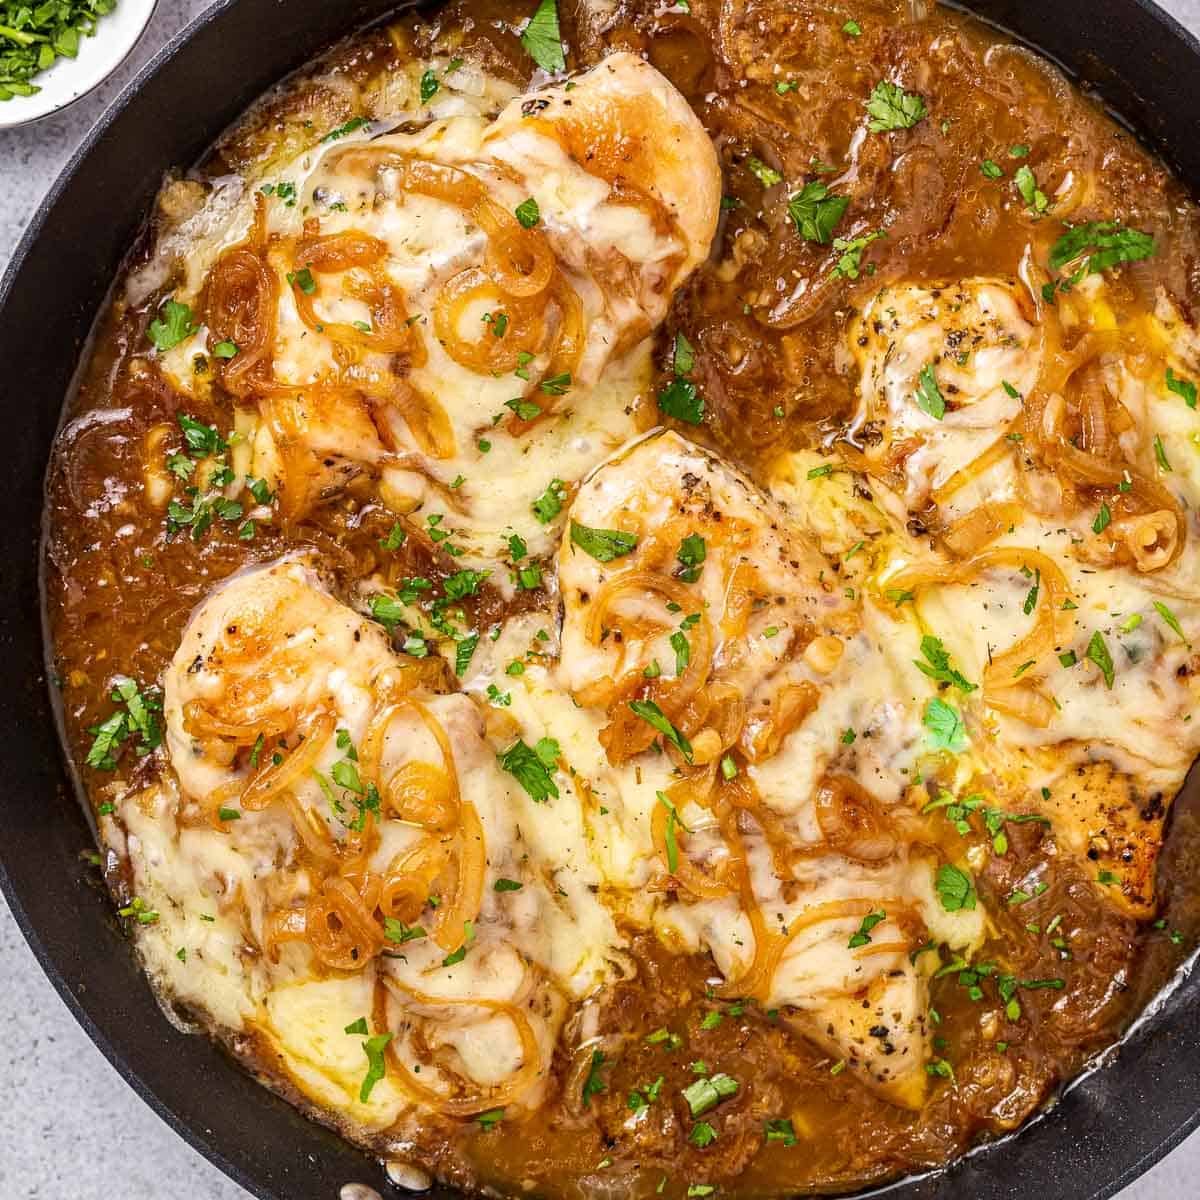 top view of a black round skillet with 4 chicken breasts in an onion soup like sauce topped with melted cheese